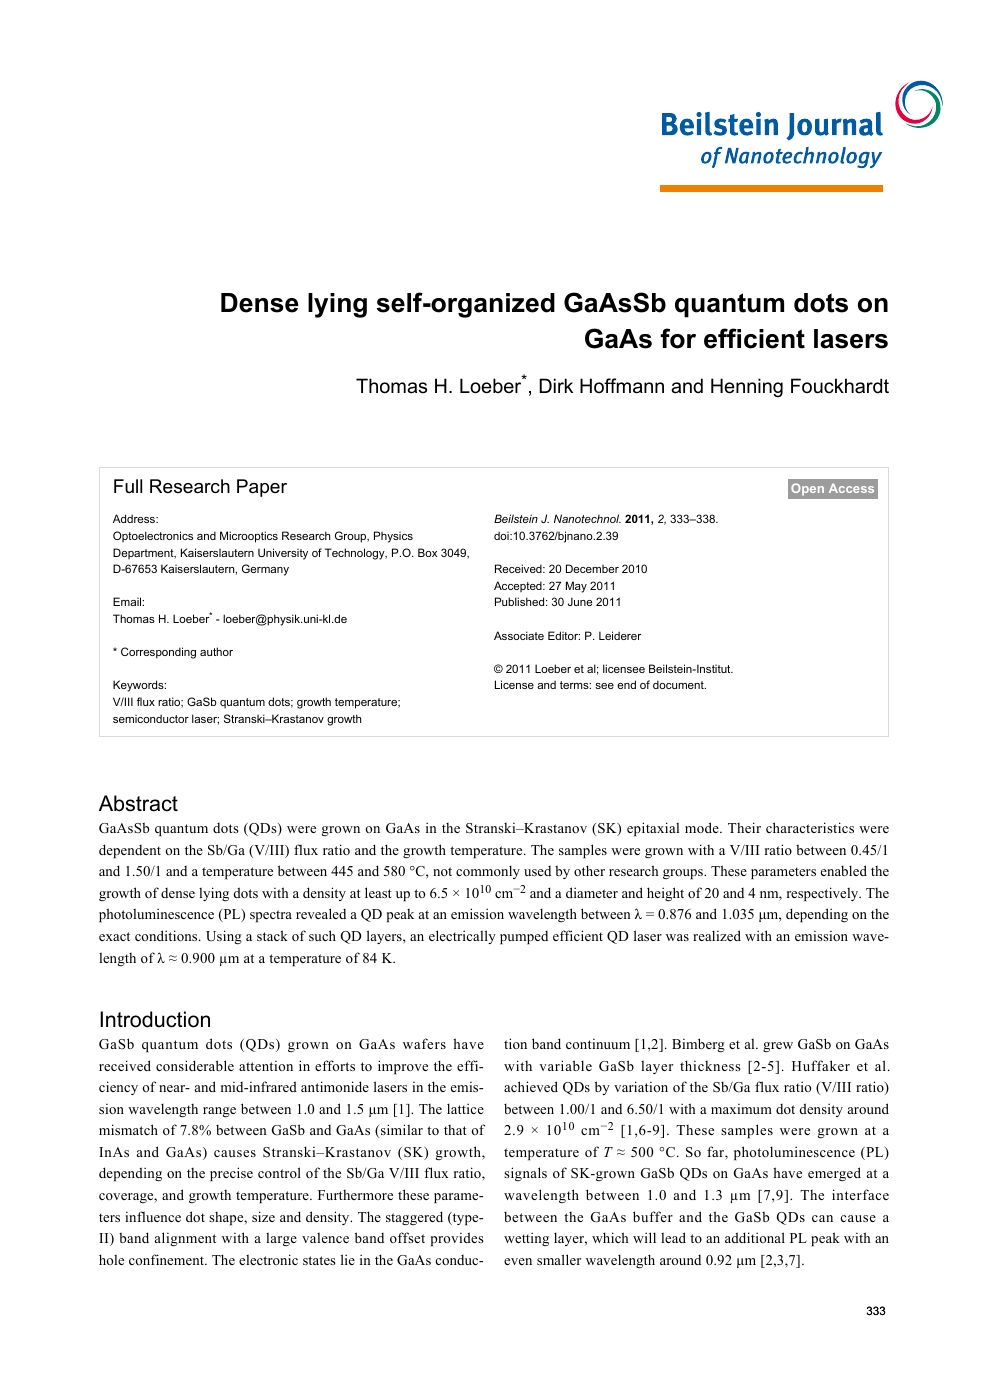 Dense Lying Self Organized Gaassb Quantum Dots On Gaas For Efficient Lasers Topic Of Research Paper In Nano Technology Download Scholarly Article Pdf And Read For Free On Cyberleninka Open Science Hub